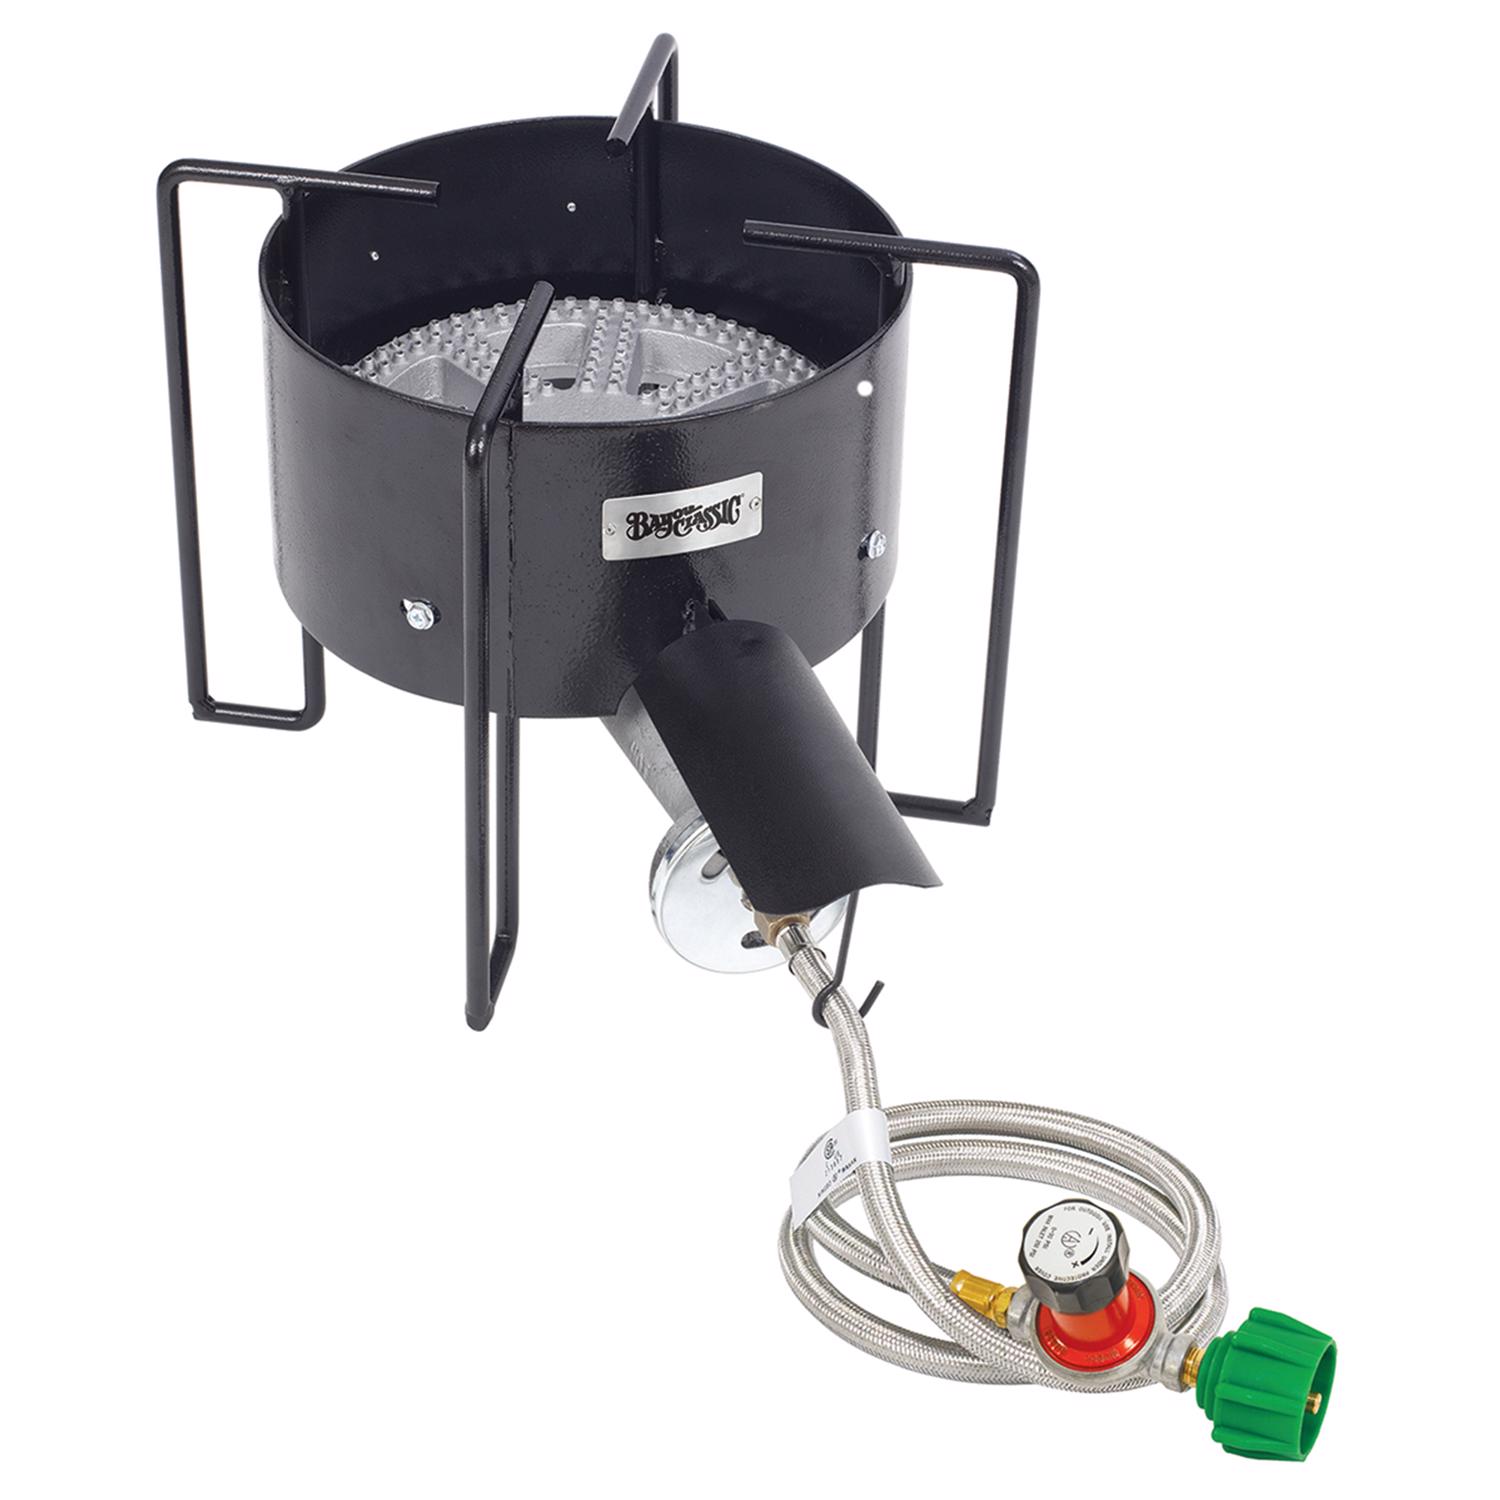 Photos - Other goods for tourism Classic Bayou  164000 BTU Welded Steel Frame Outdoor Cooker KAB4 